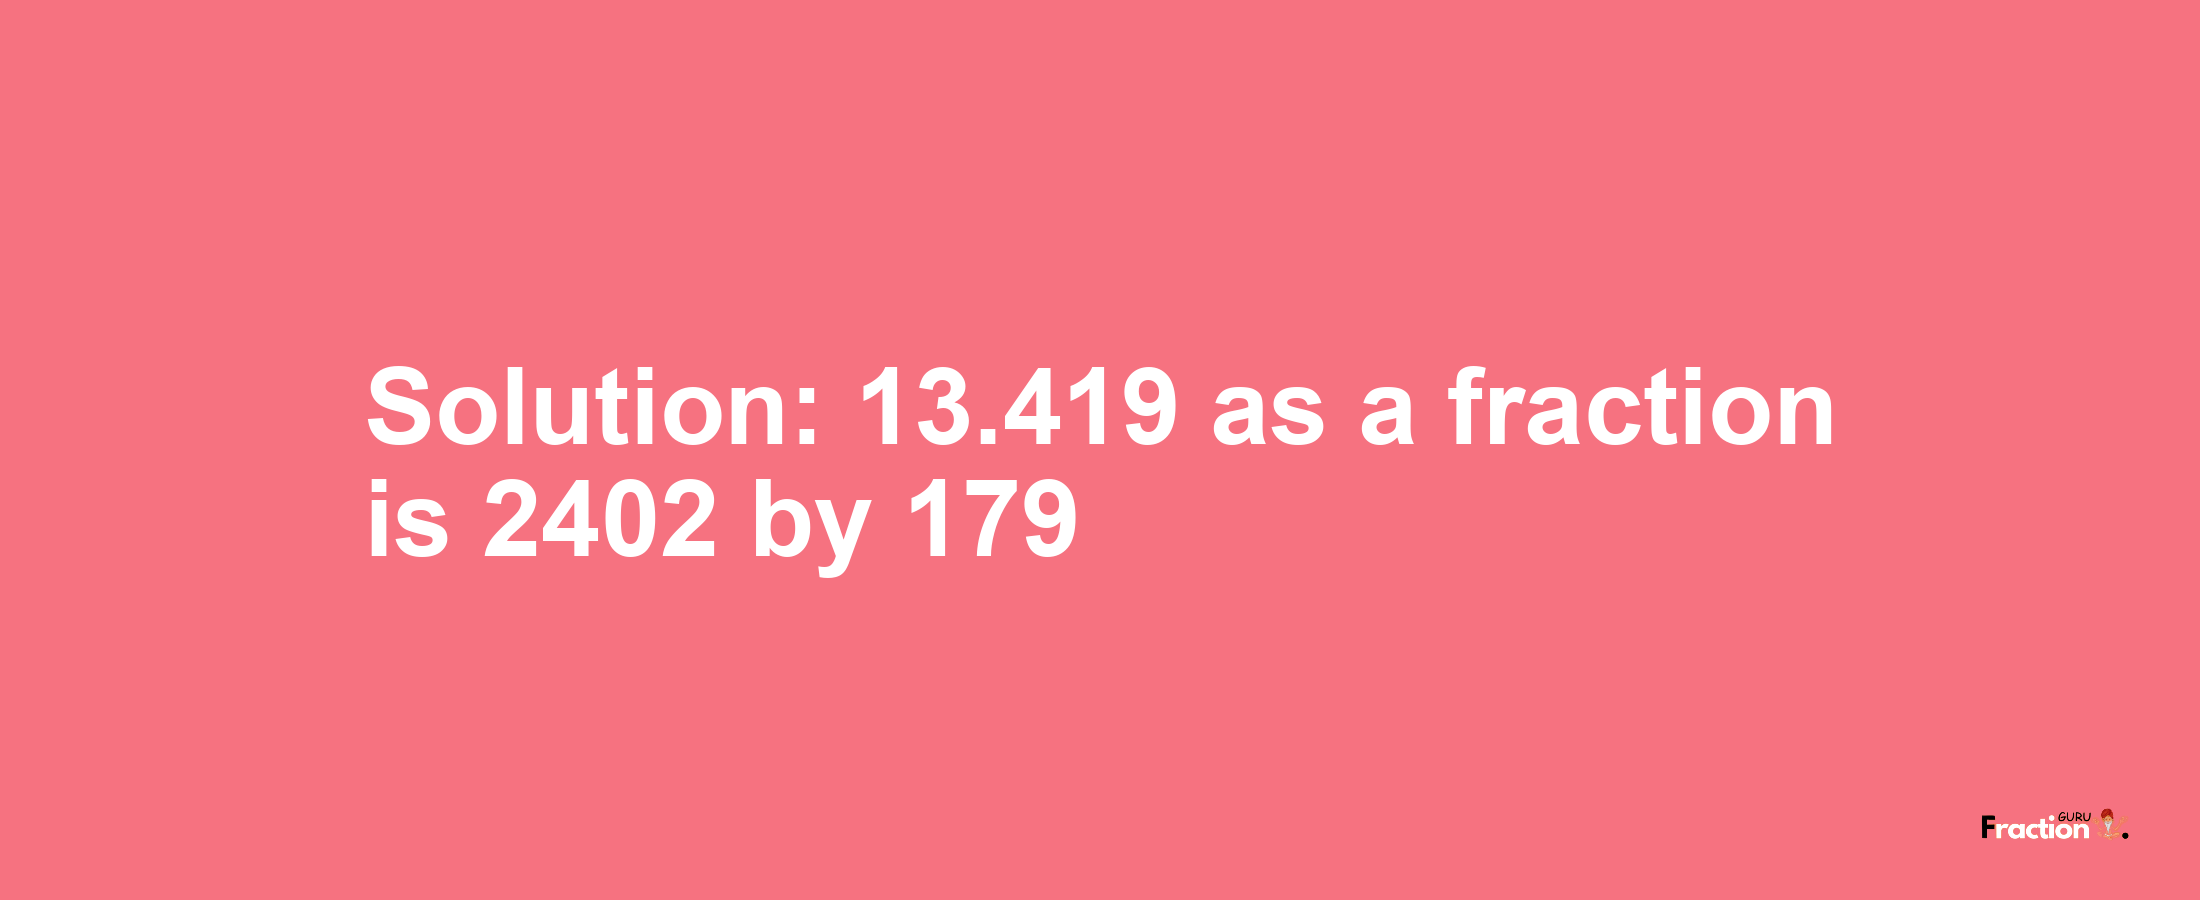 Solution:13.419 as a fraction is 2402/179